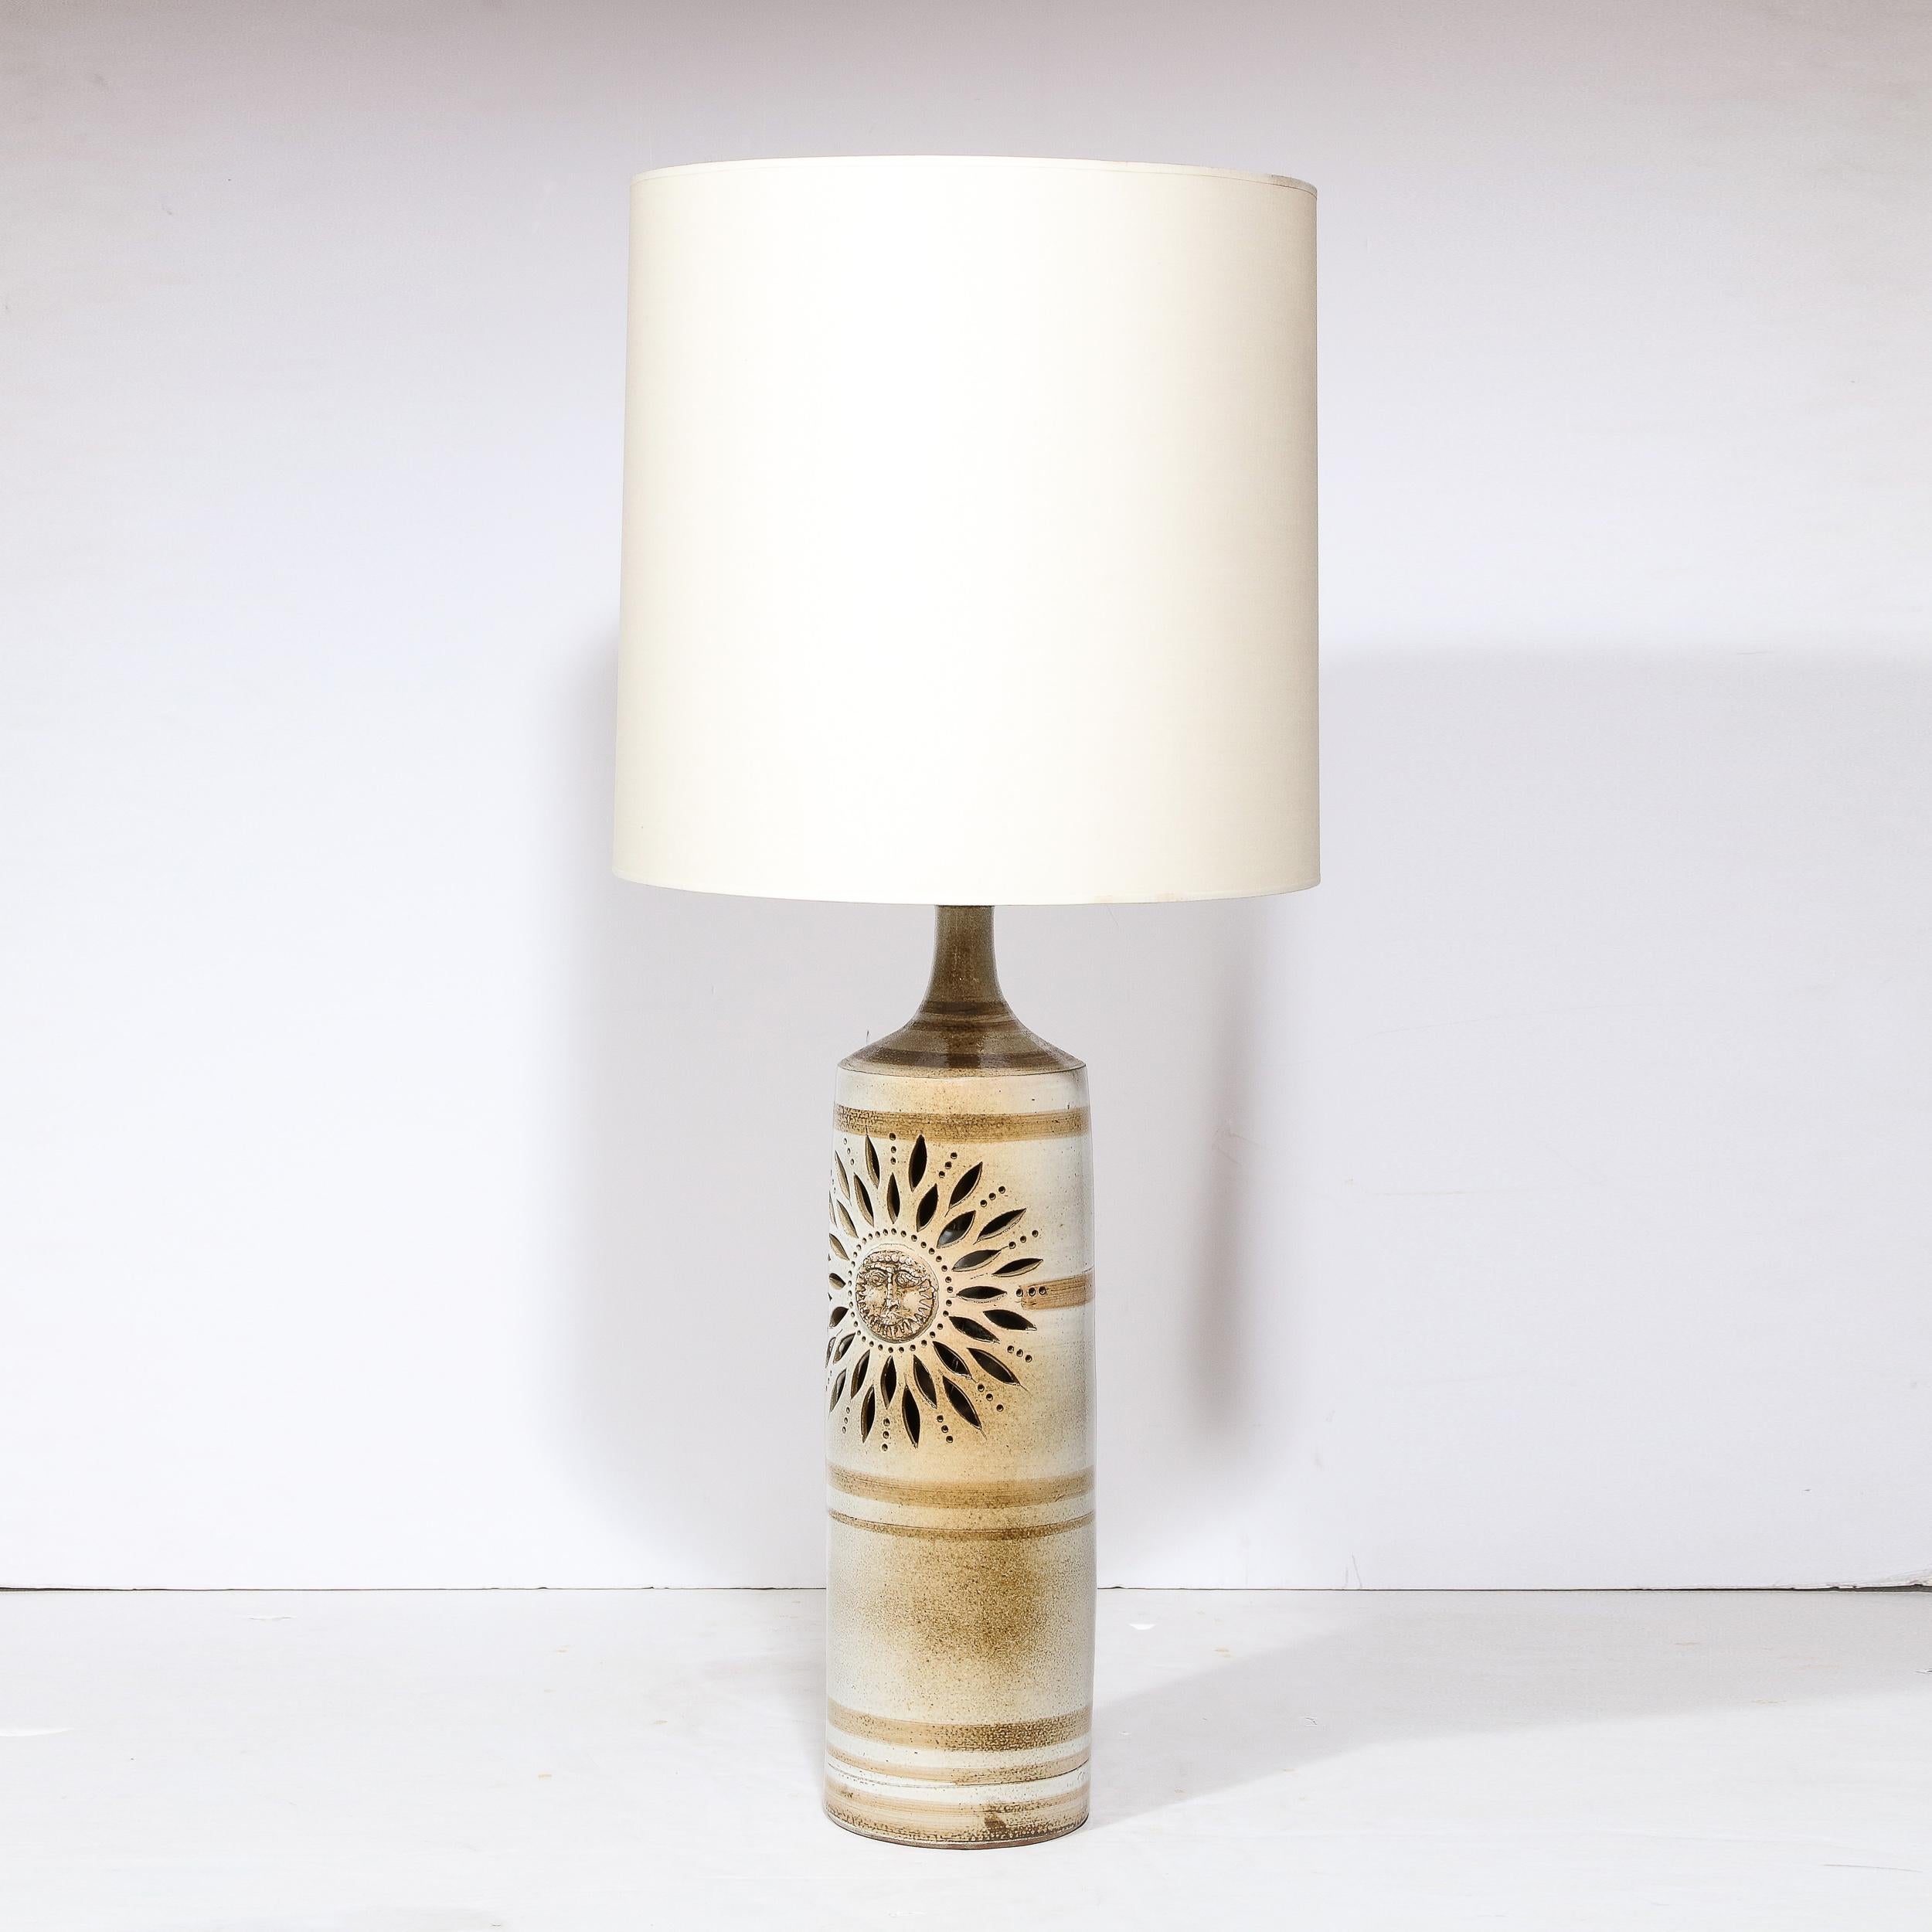 Midcentury Ceramic Hand Painted Floral Sun Motif Table Lamp by Pierre Pissareff In Excellent Condition For Sale In New York, NY